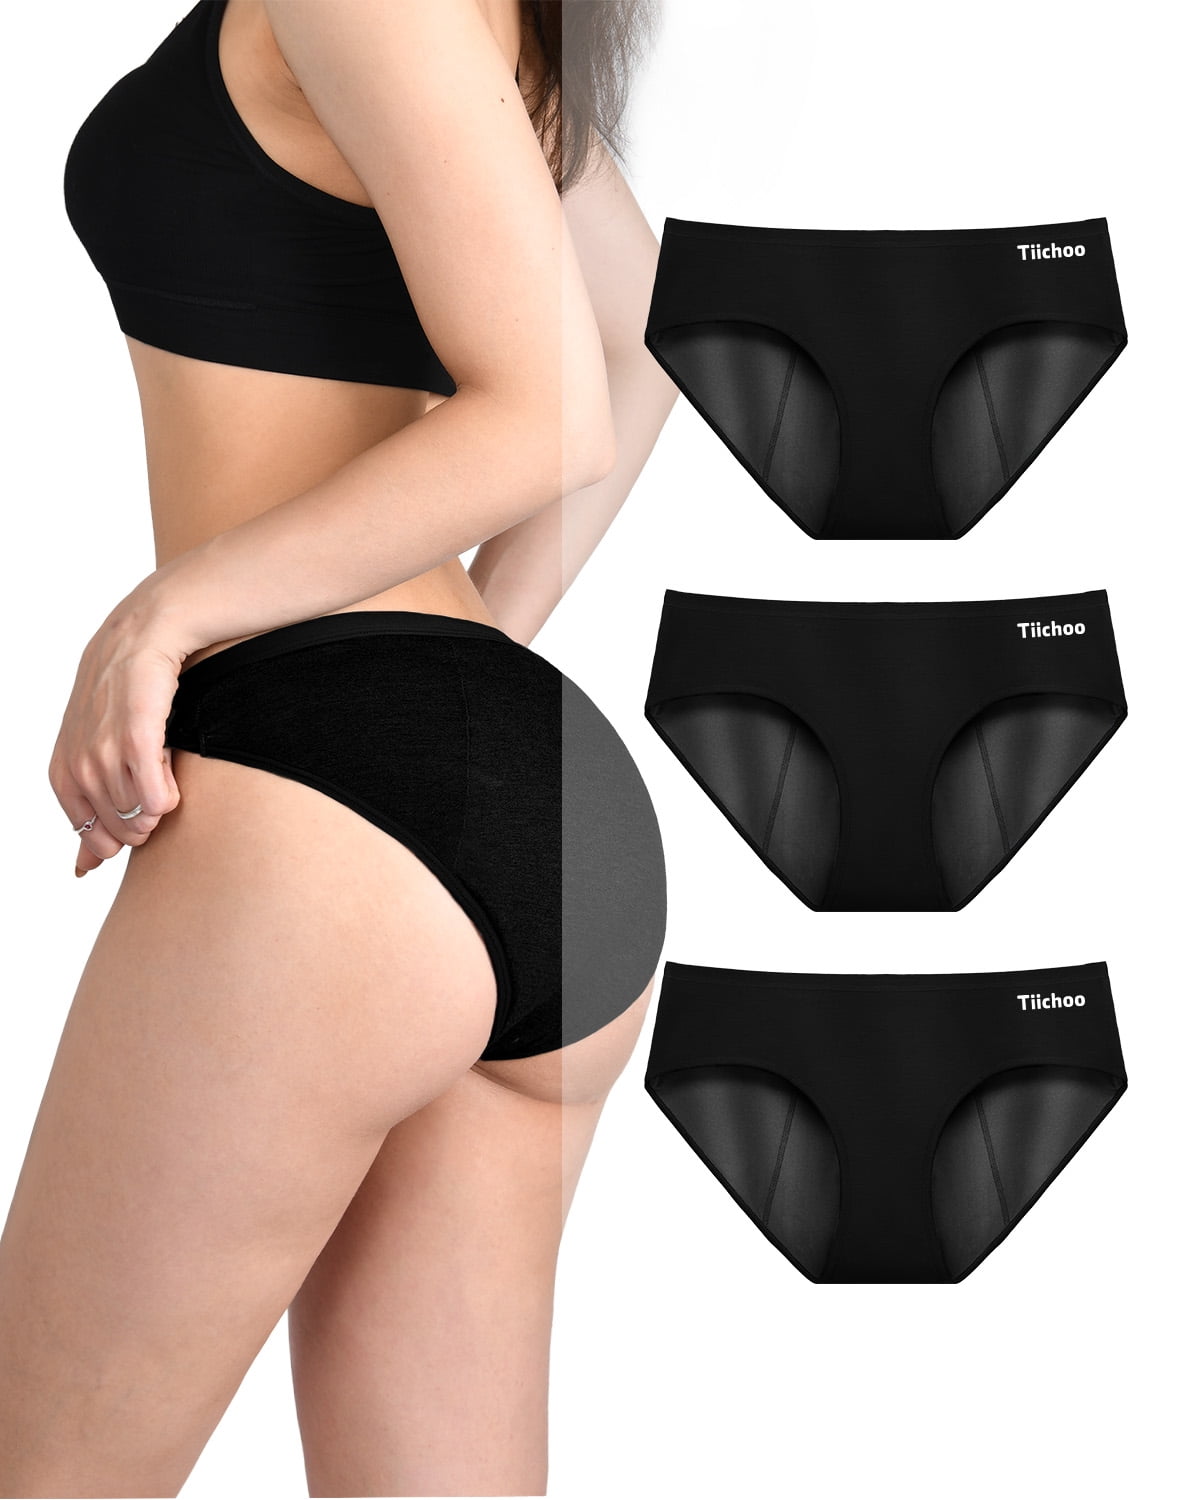 TANSTC Period Underwear for Women Heavy Flow High Absorbency Postpartum  Menstrual Panties Leakproof Cotton Hipster 3 Pack Black Black Black at   Women's Clothing store